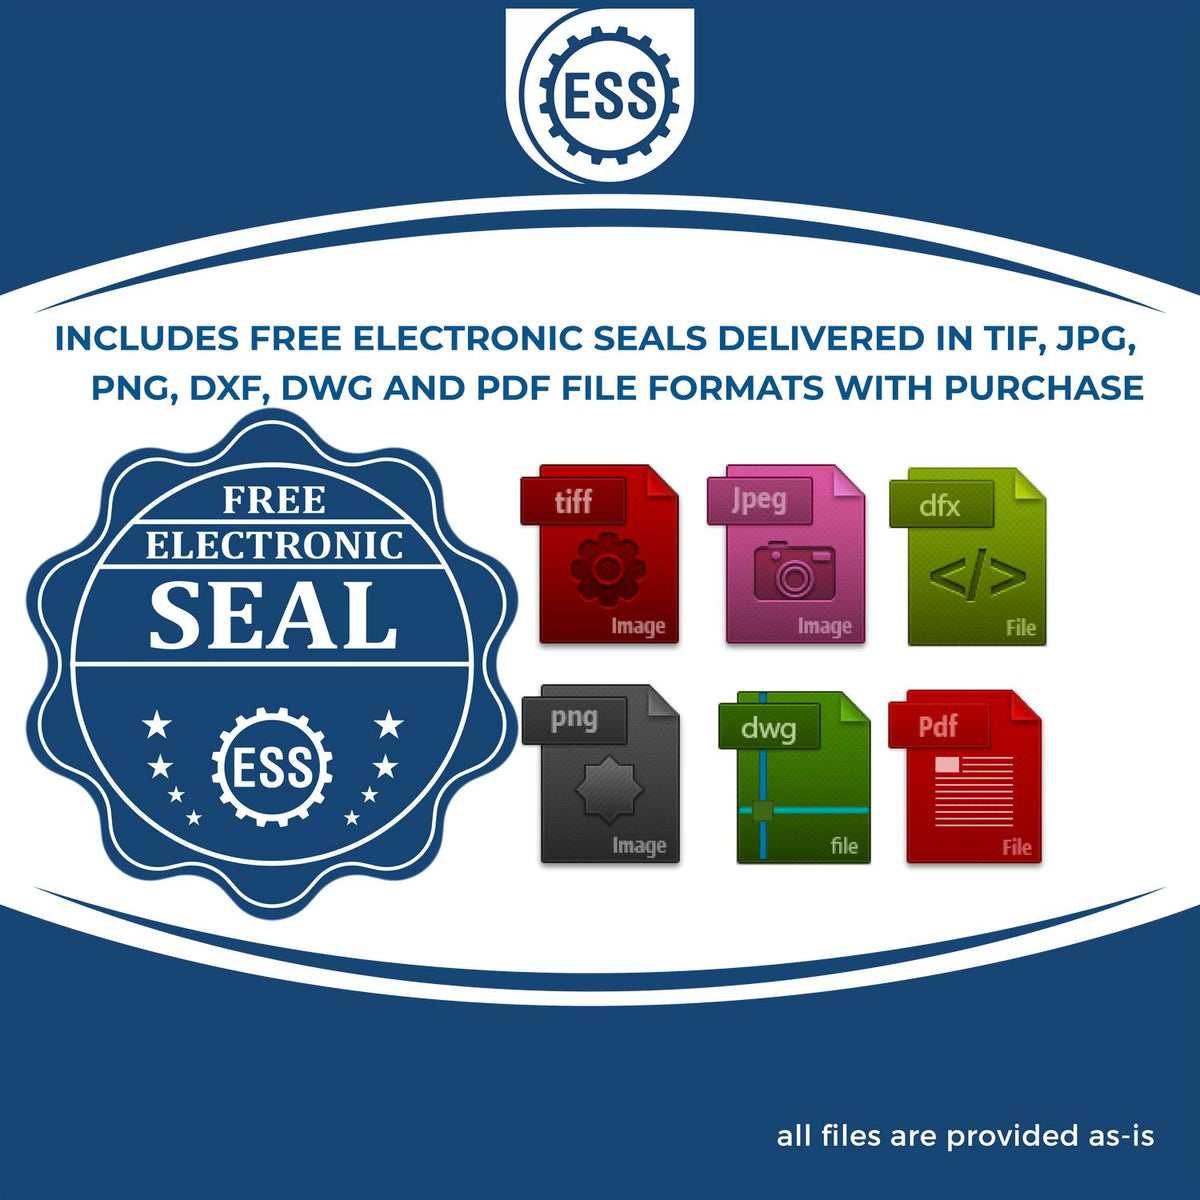 An infographic for the free electronic seal for the PSI Kansas Notary Stamp illustrating the different file type icons such as DXF, DWG, TIF, JPG and PNG.